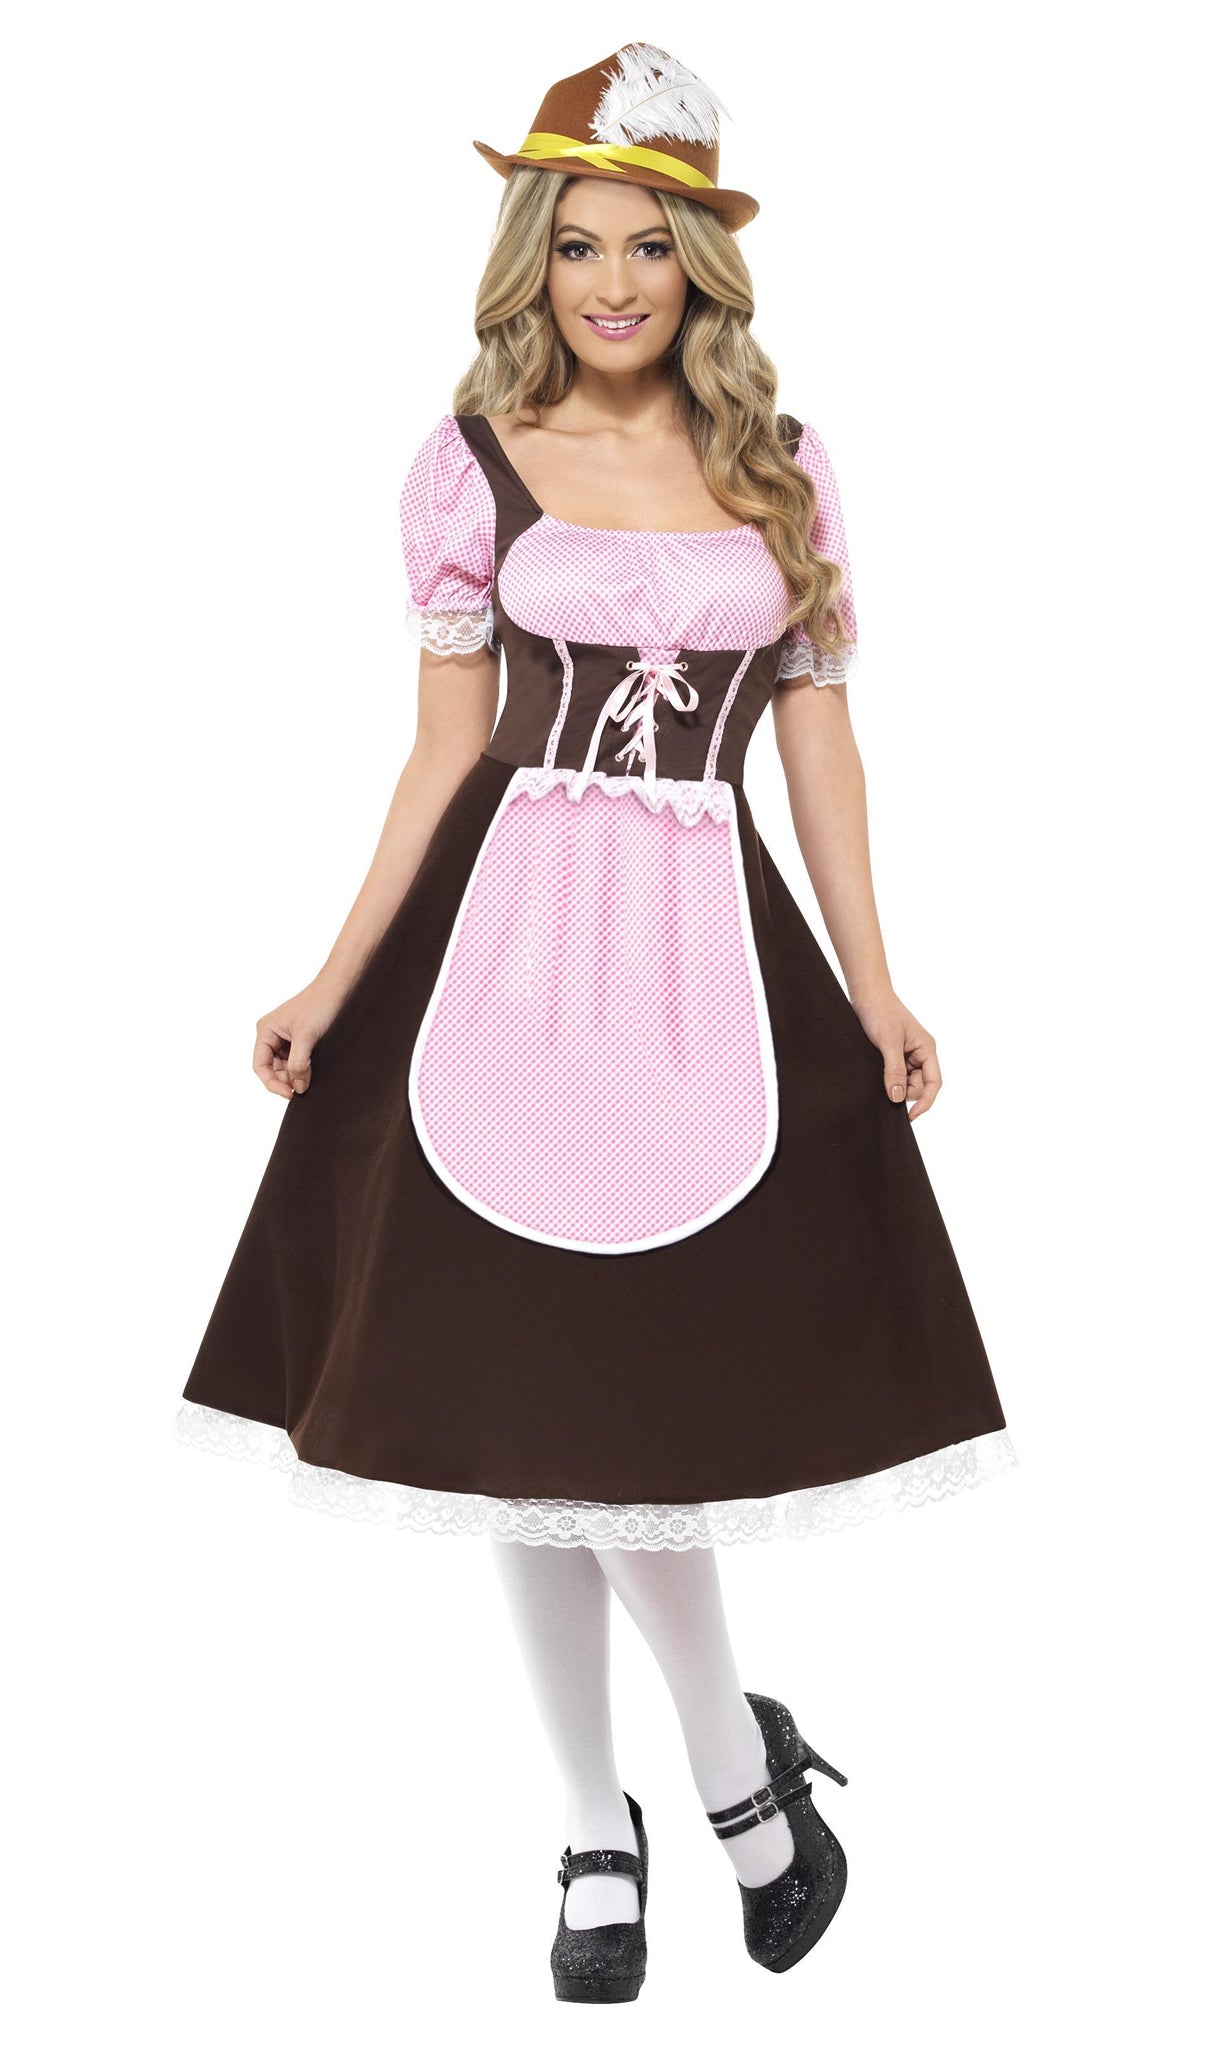 Pink and brown Oktoberfest tavern girl dress with apron